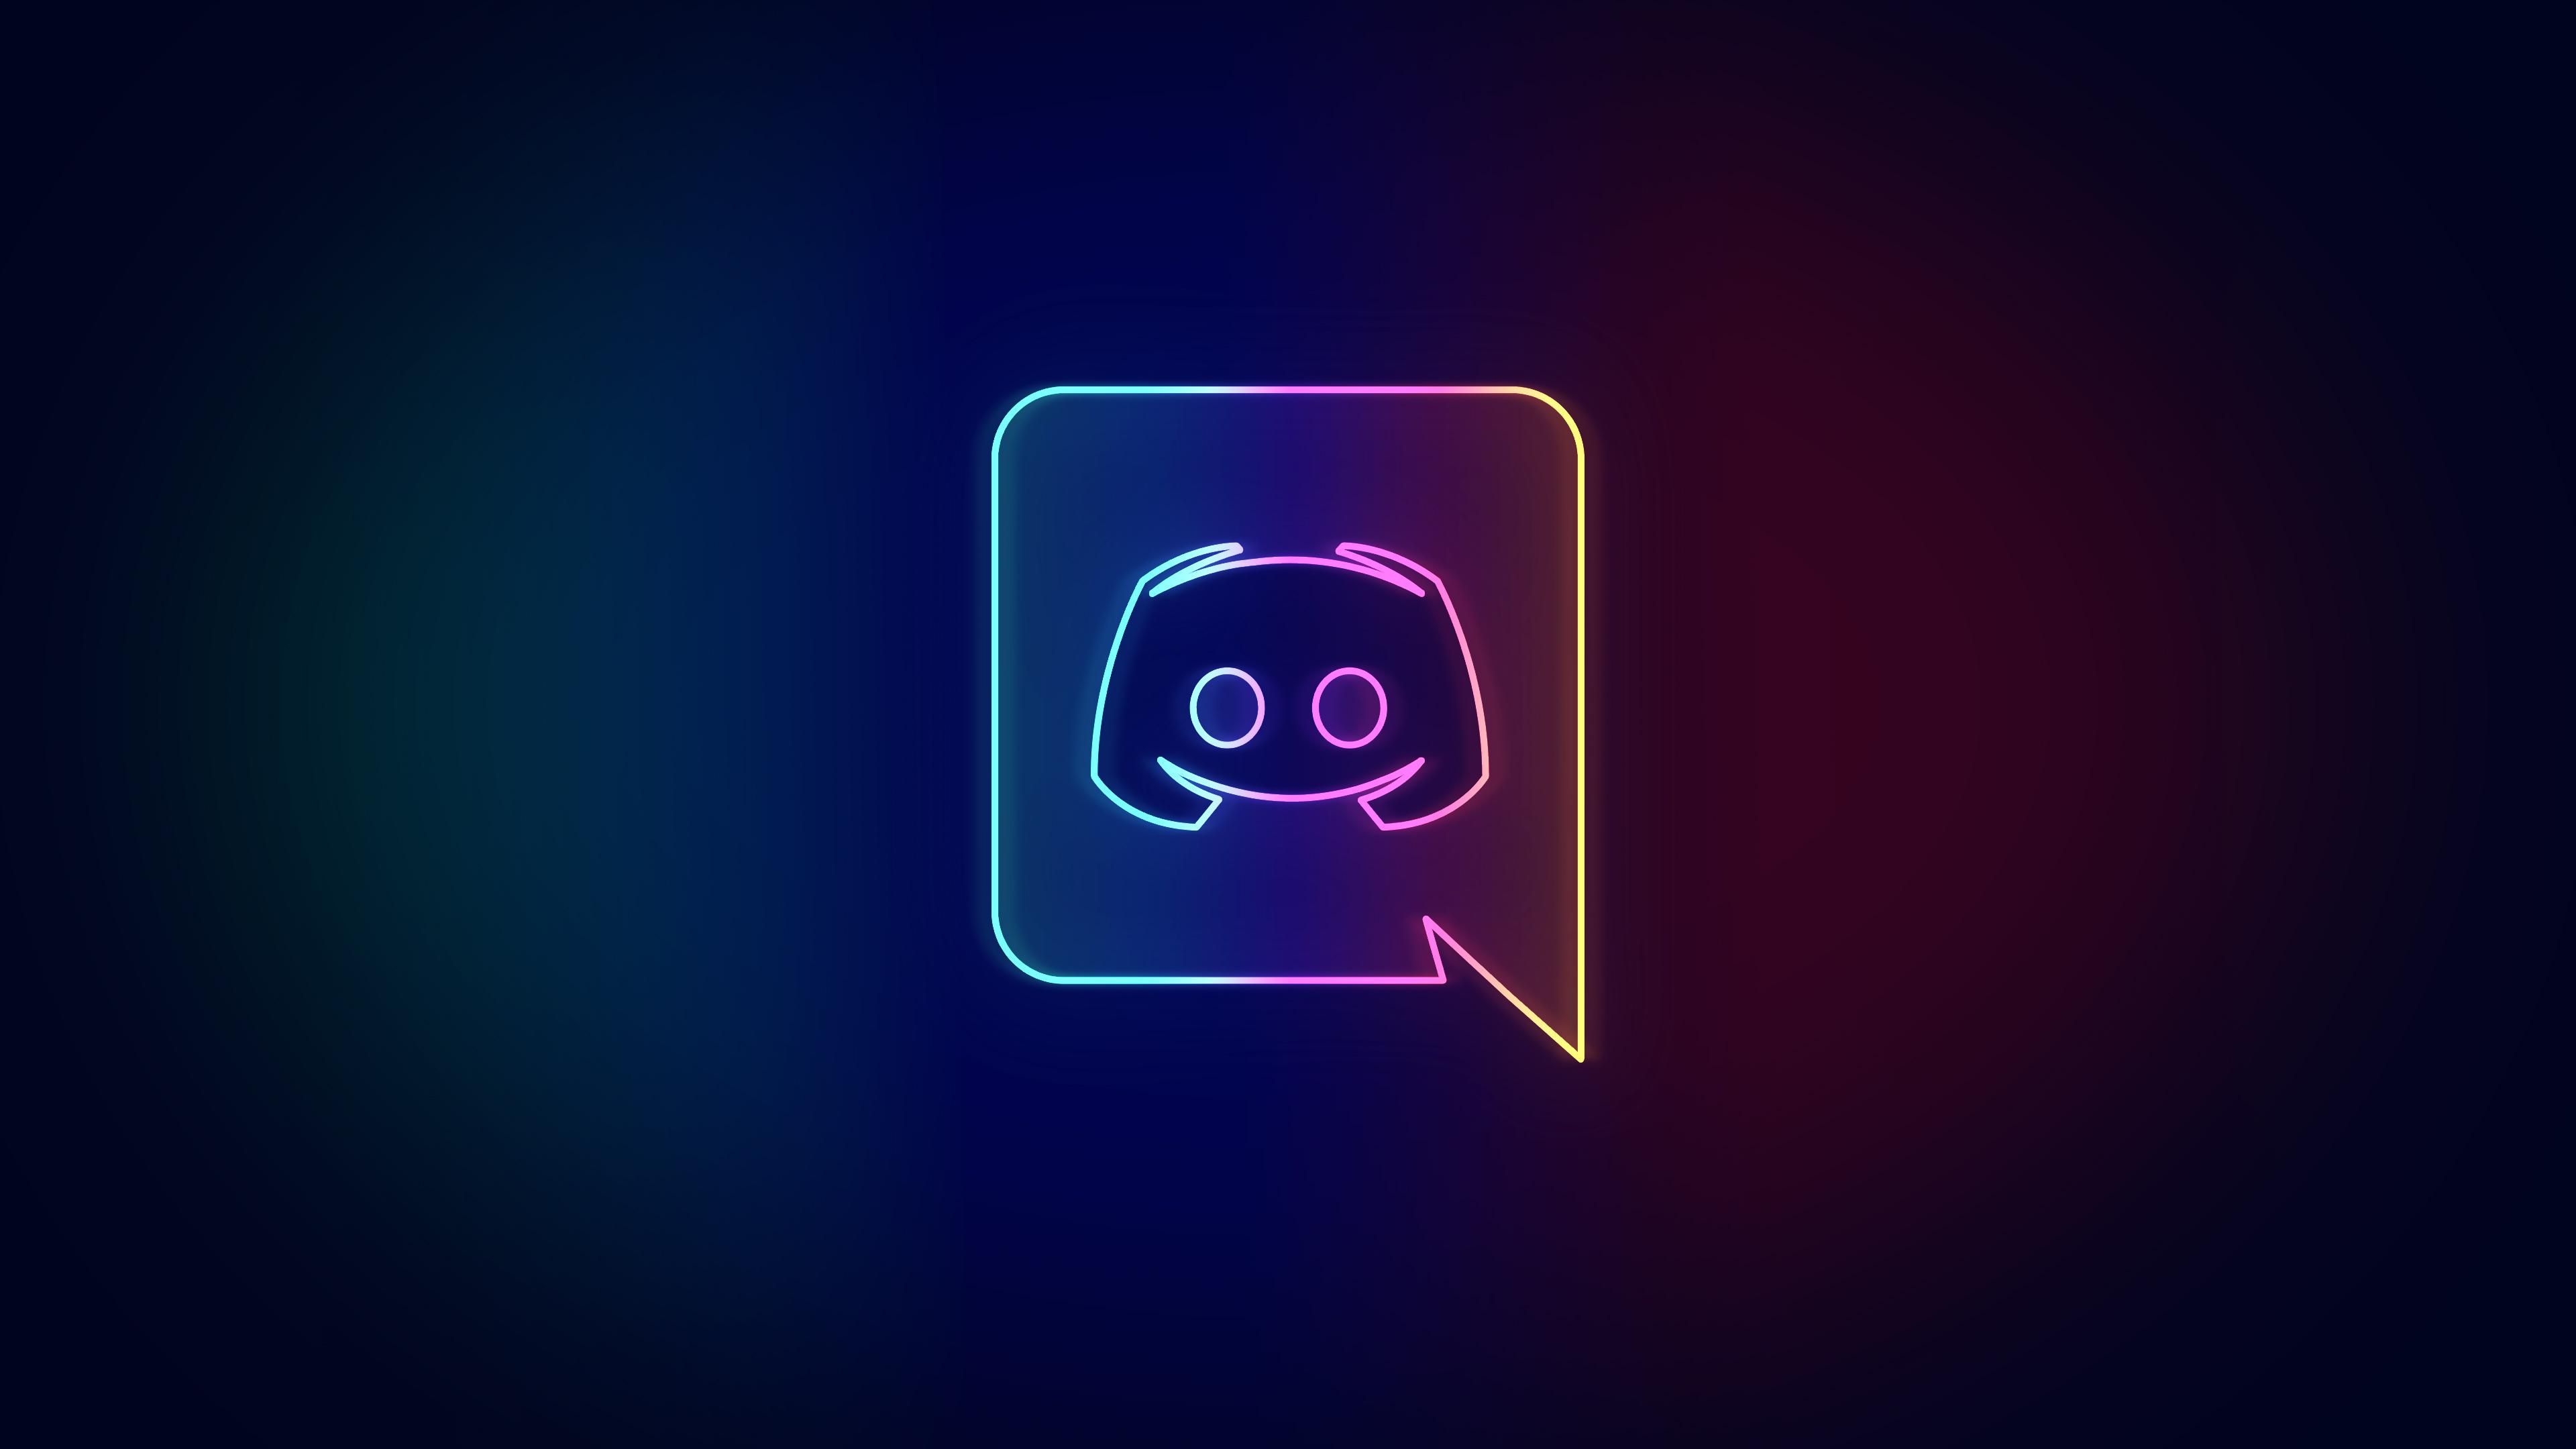 Discord Wallpapers